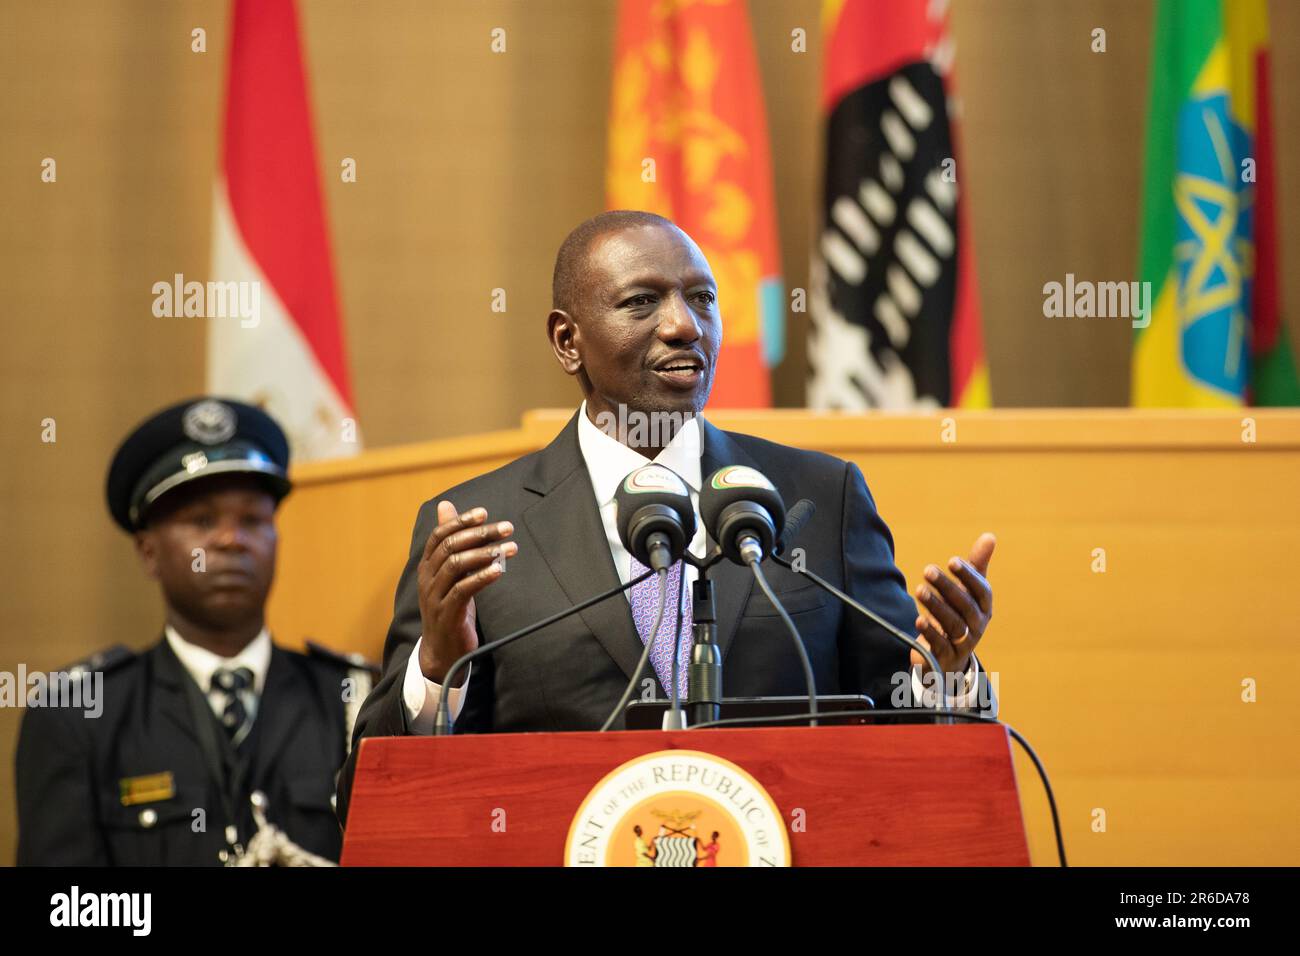 Lusaka, Zambia. 8th June, 2023. Kenyan President William Ruto speaks during the 22nd Common Market for Eastern and Southern Africa (COMESA) Heads of State and Government Summit in Lusaka, Zambia, June 8, 2023. The 22nd Common Market for Eastern and Southern Africa (COMESA) Heads of State and Government Summit opened here Thursday, with leaders calling for accelerated efforts to achieve economic integration. Credit: Peng Lijun/Xinhua/Alamy Live News Stock Photo